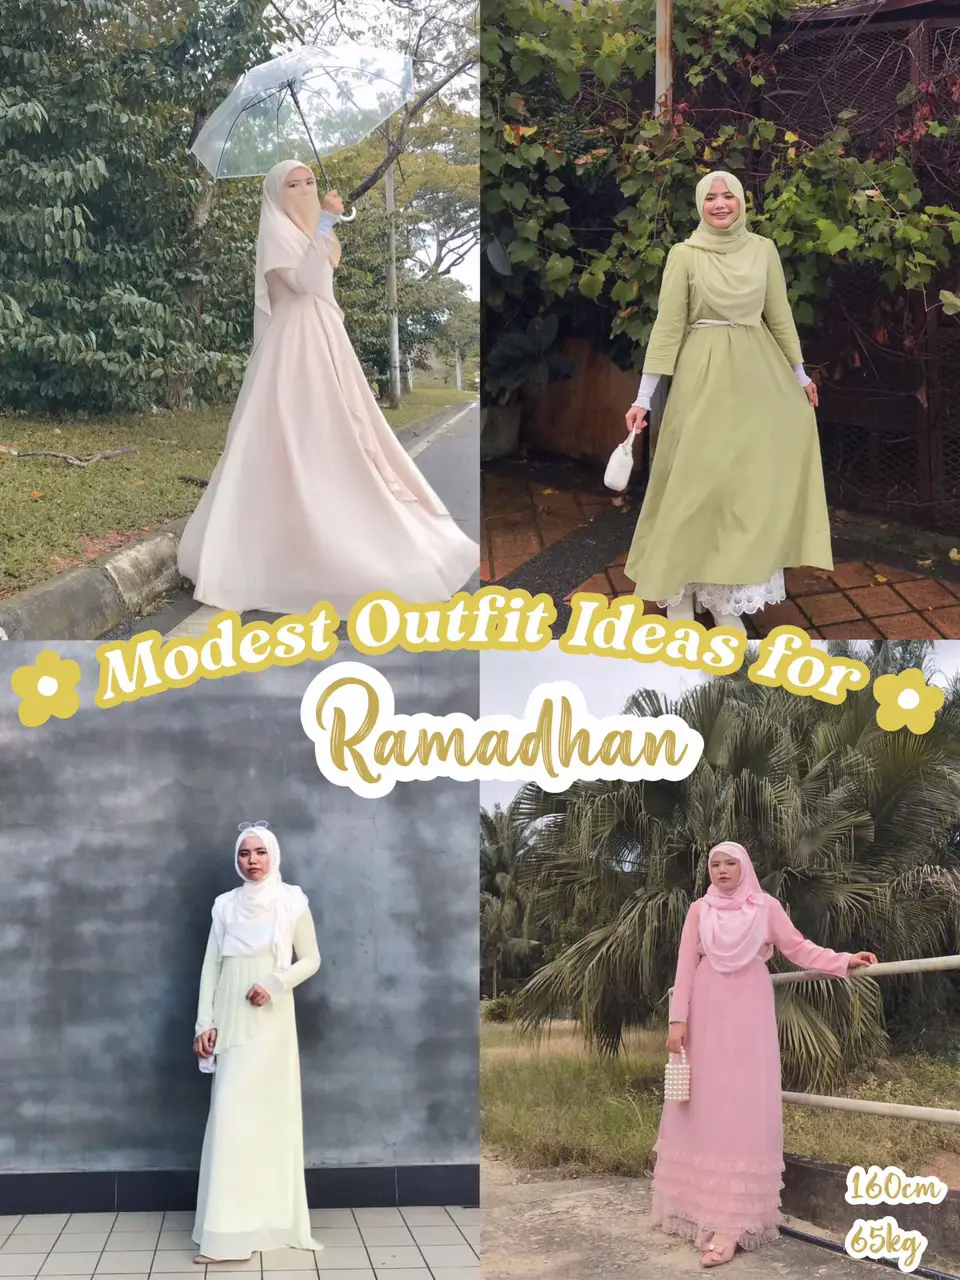 Modest Outfit Ideas for Eid